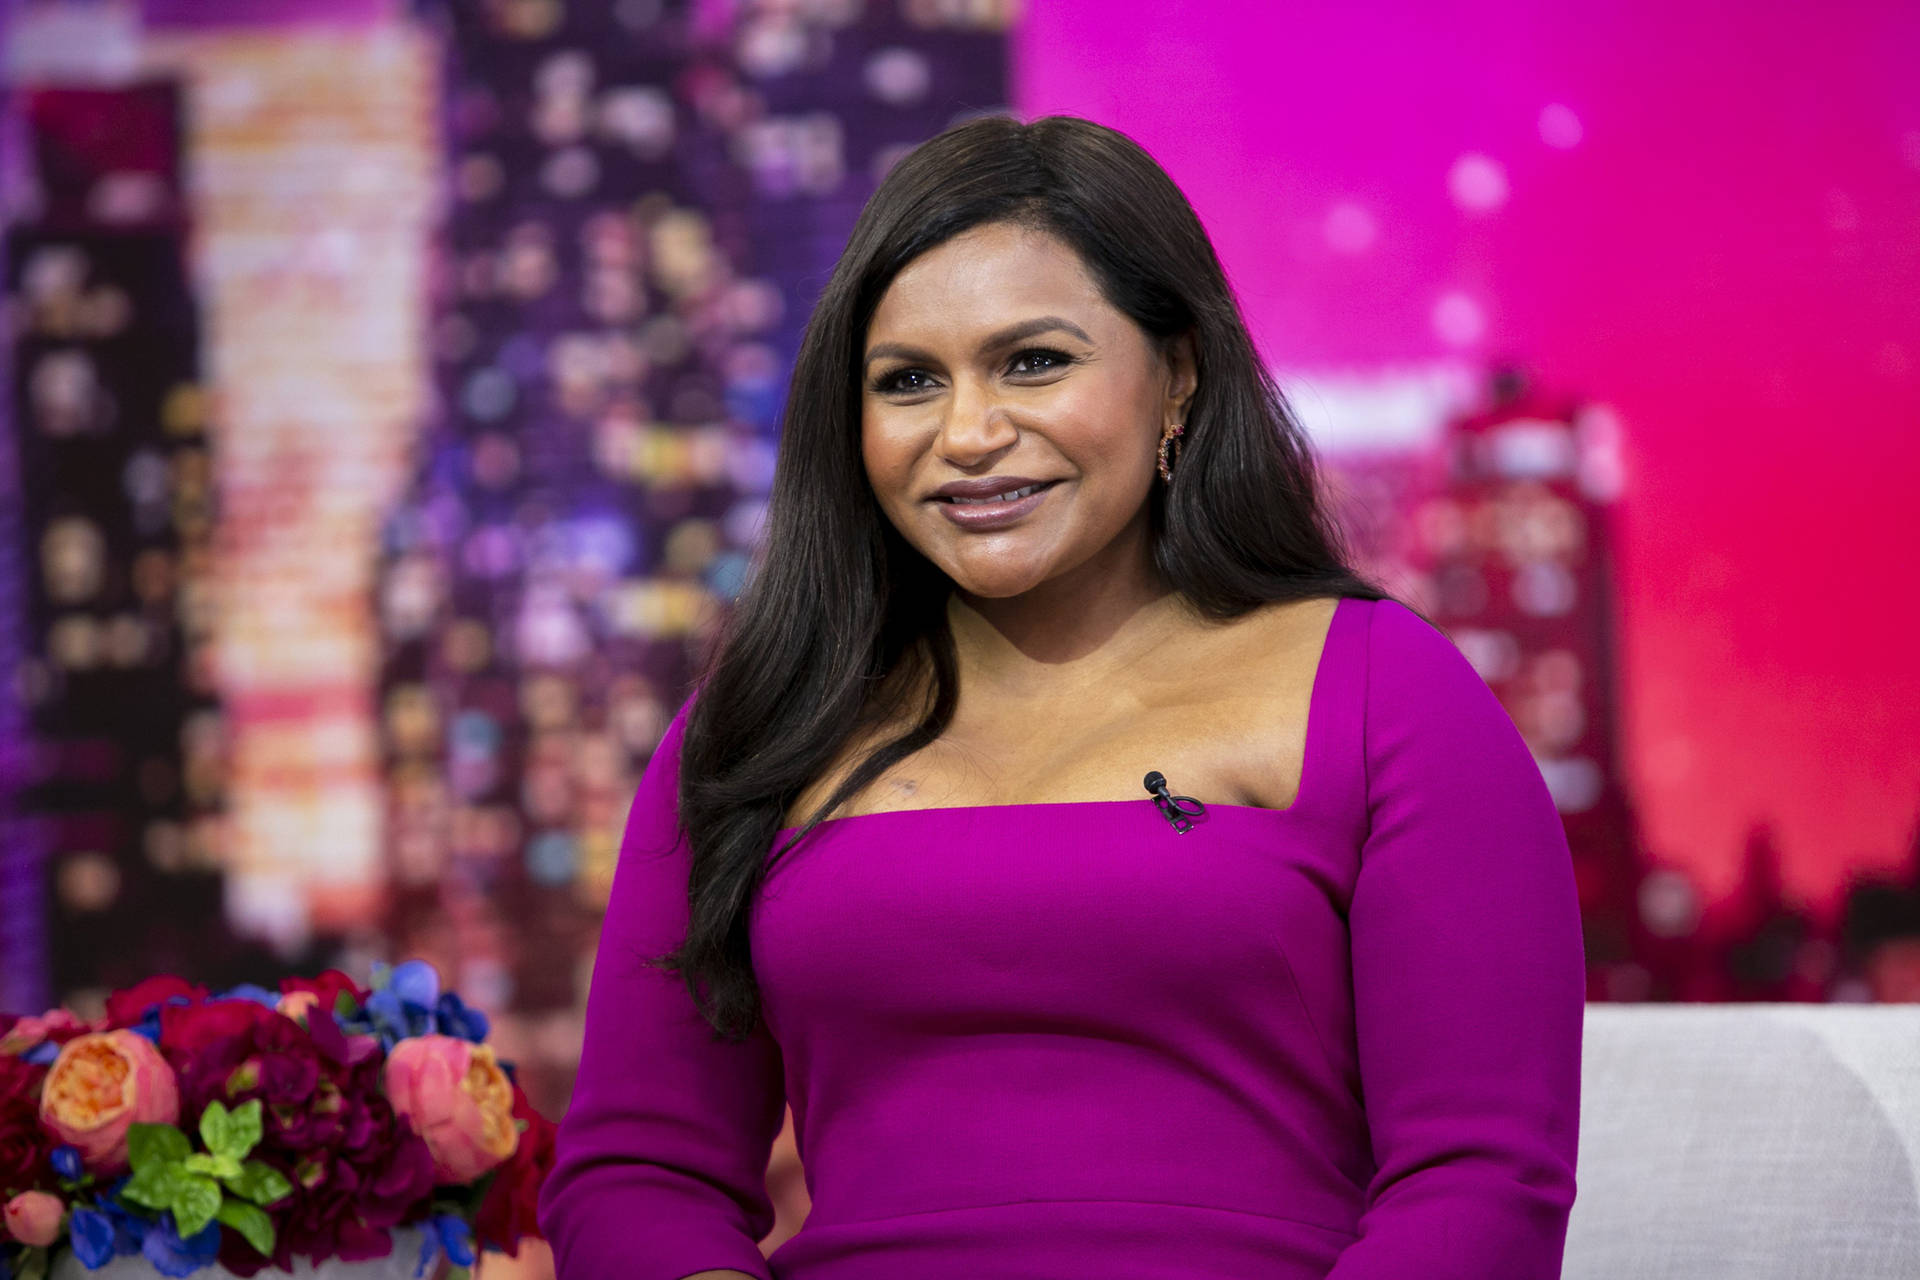 Mindy Kaling Best Selling Author Wallpaper